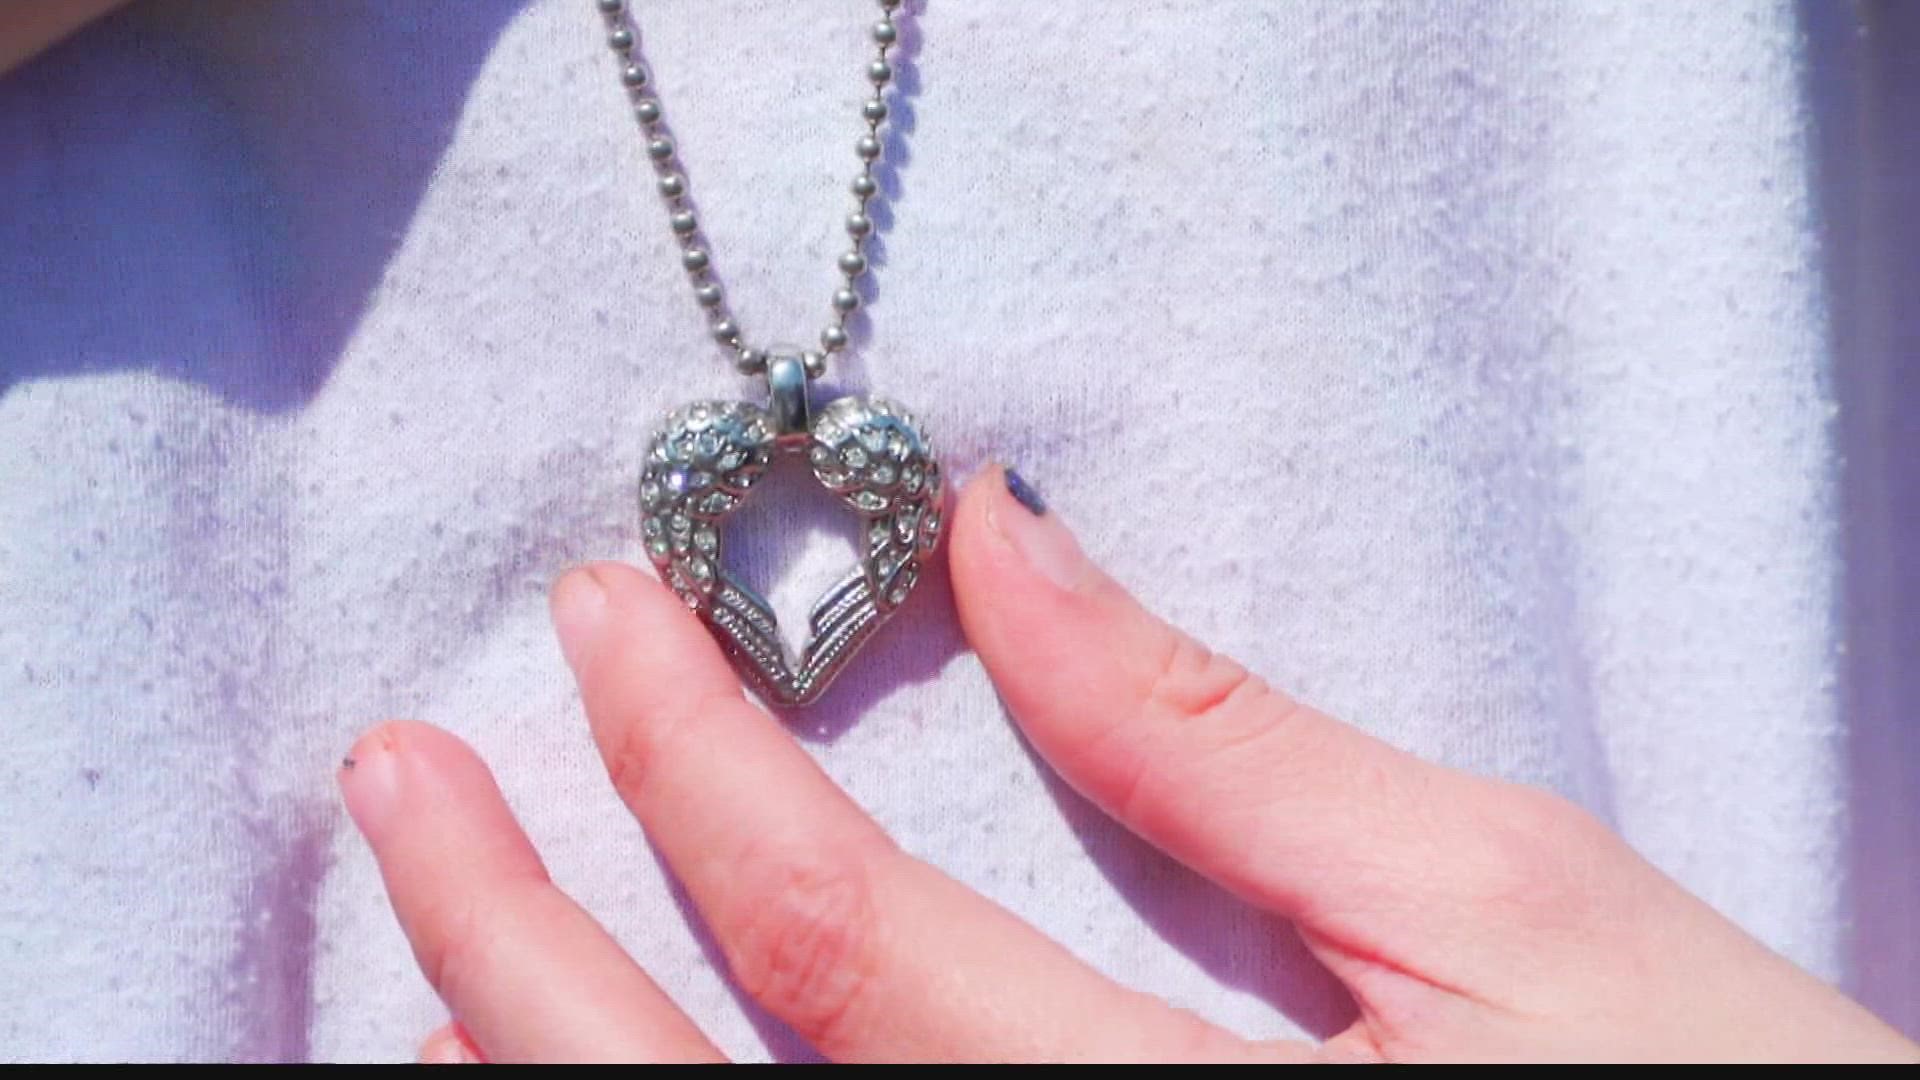 A mother had a necklace containing her son's ashes returned to her.